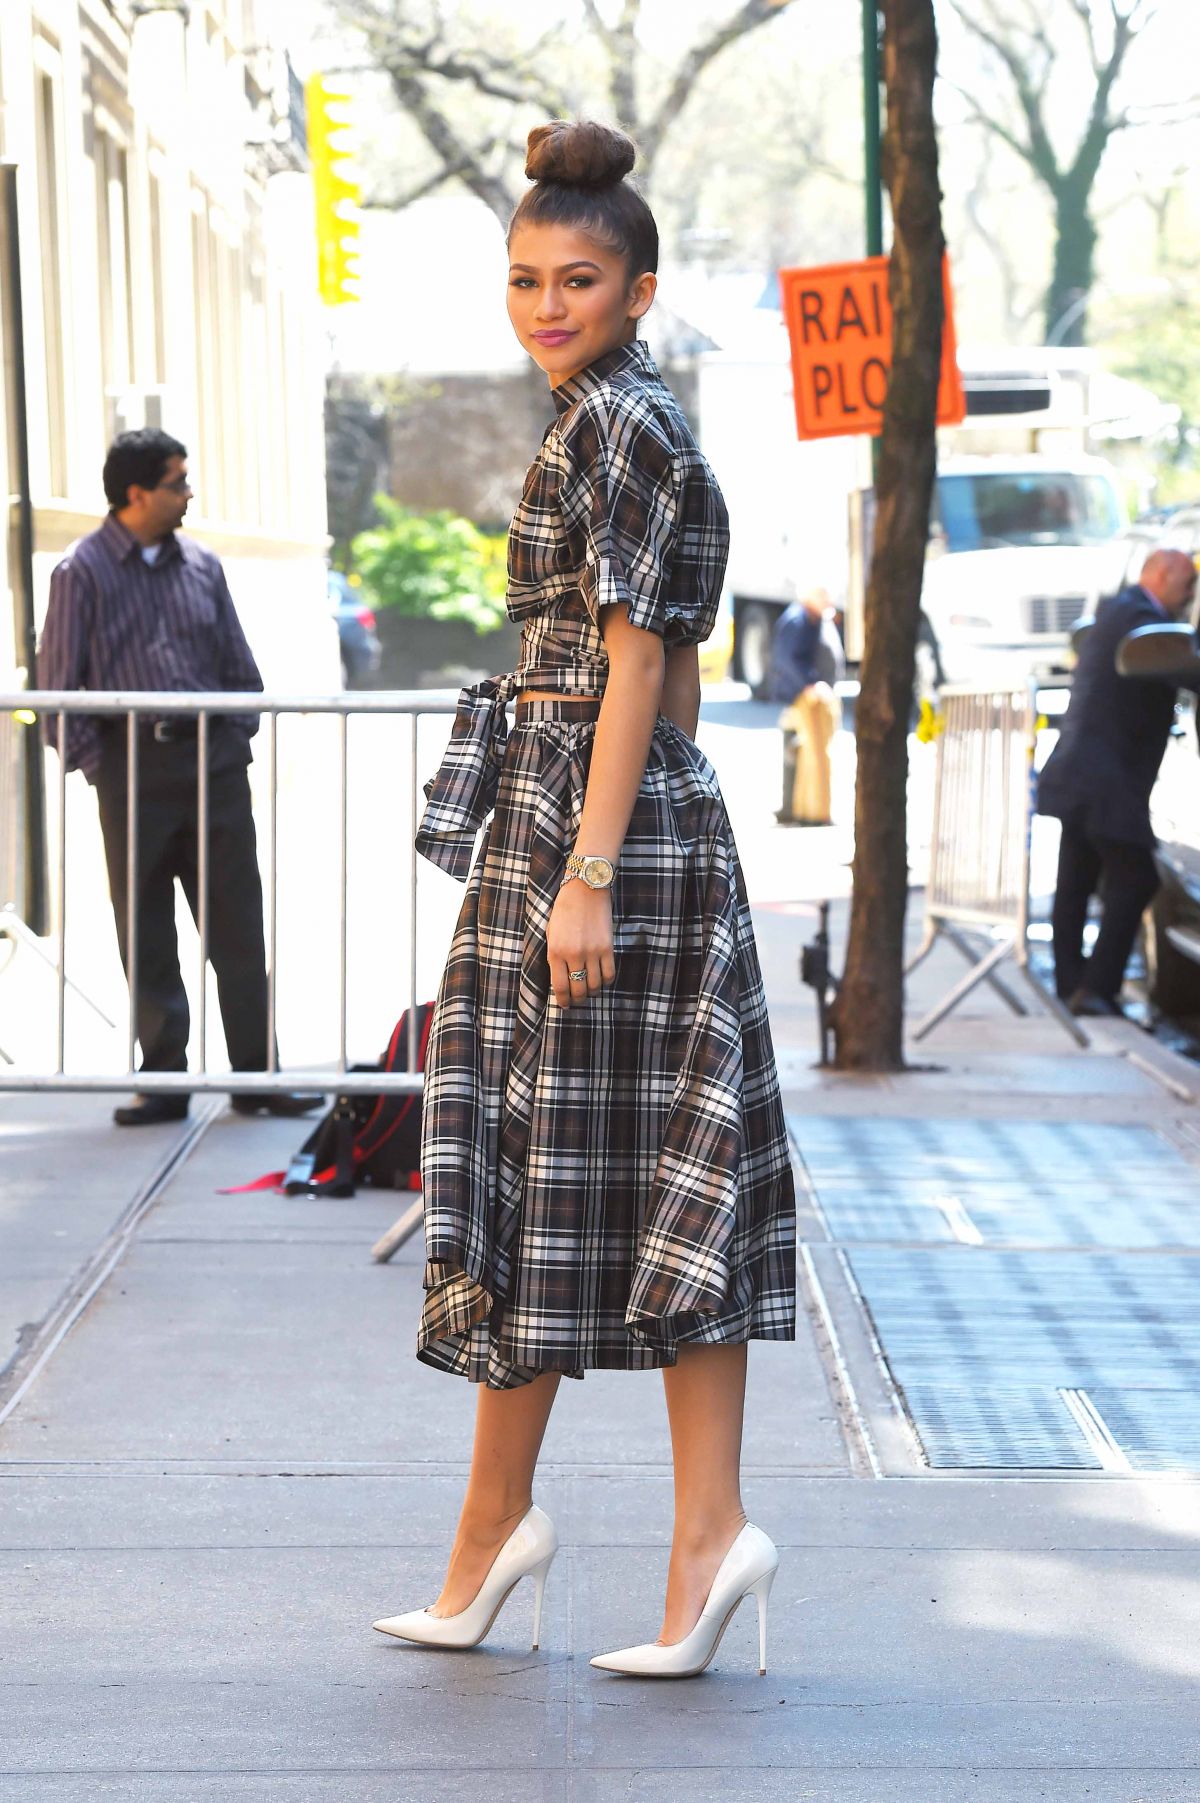 ZENDAYA COLEMAN Arrives at The View in New York 04/22/2015 – HawtCelebs